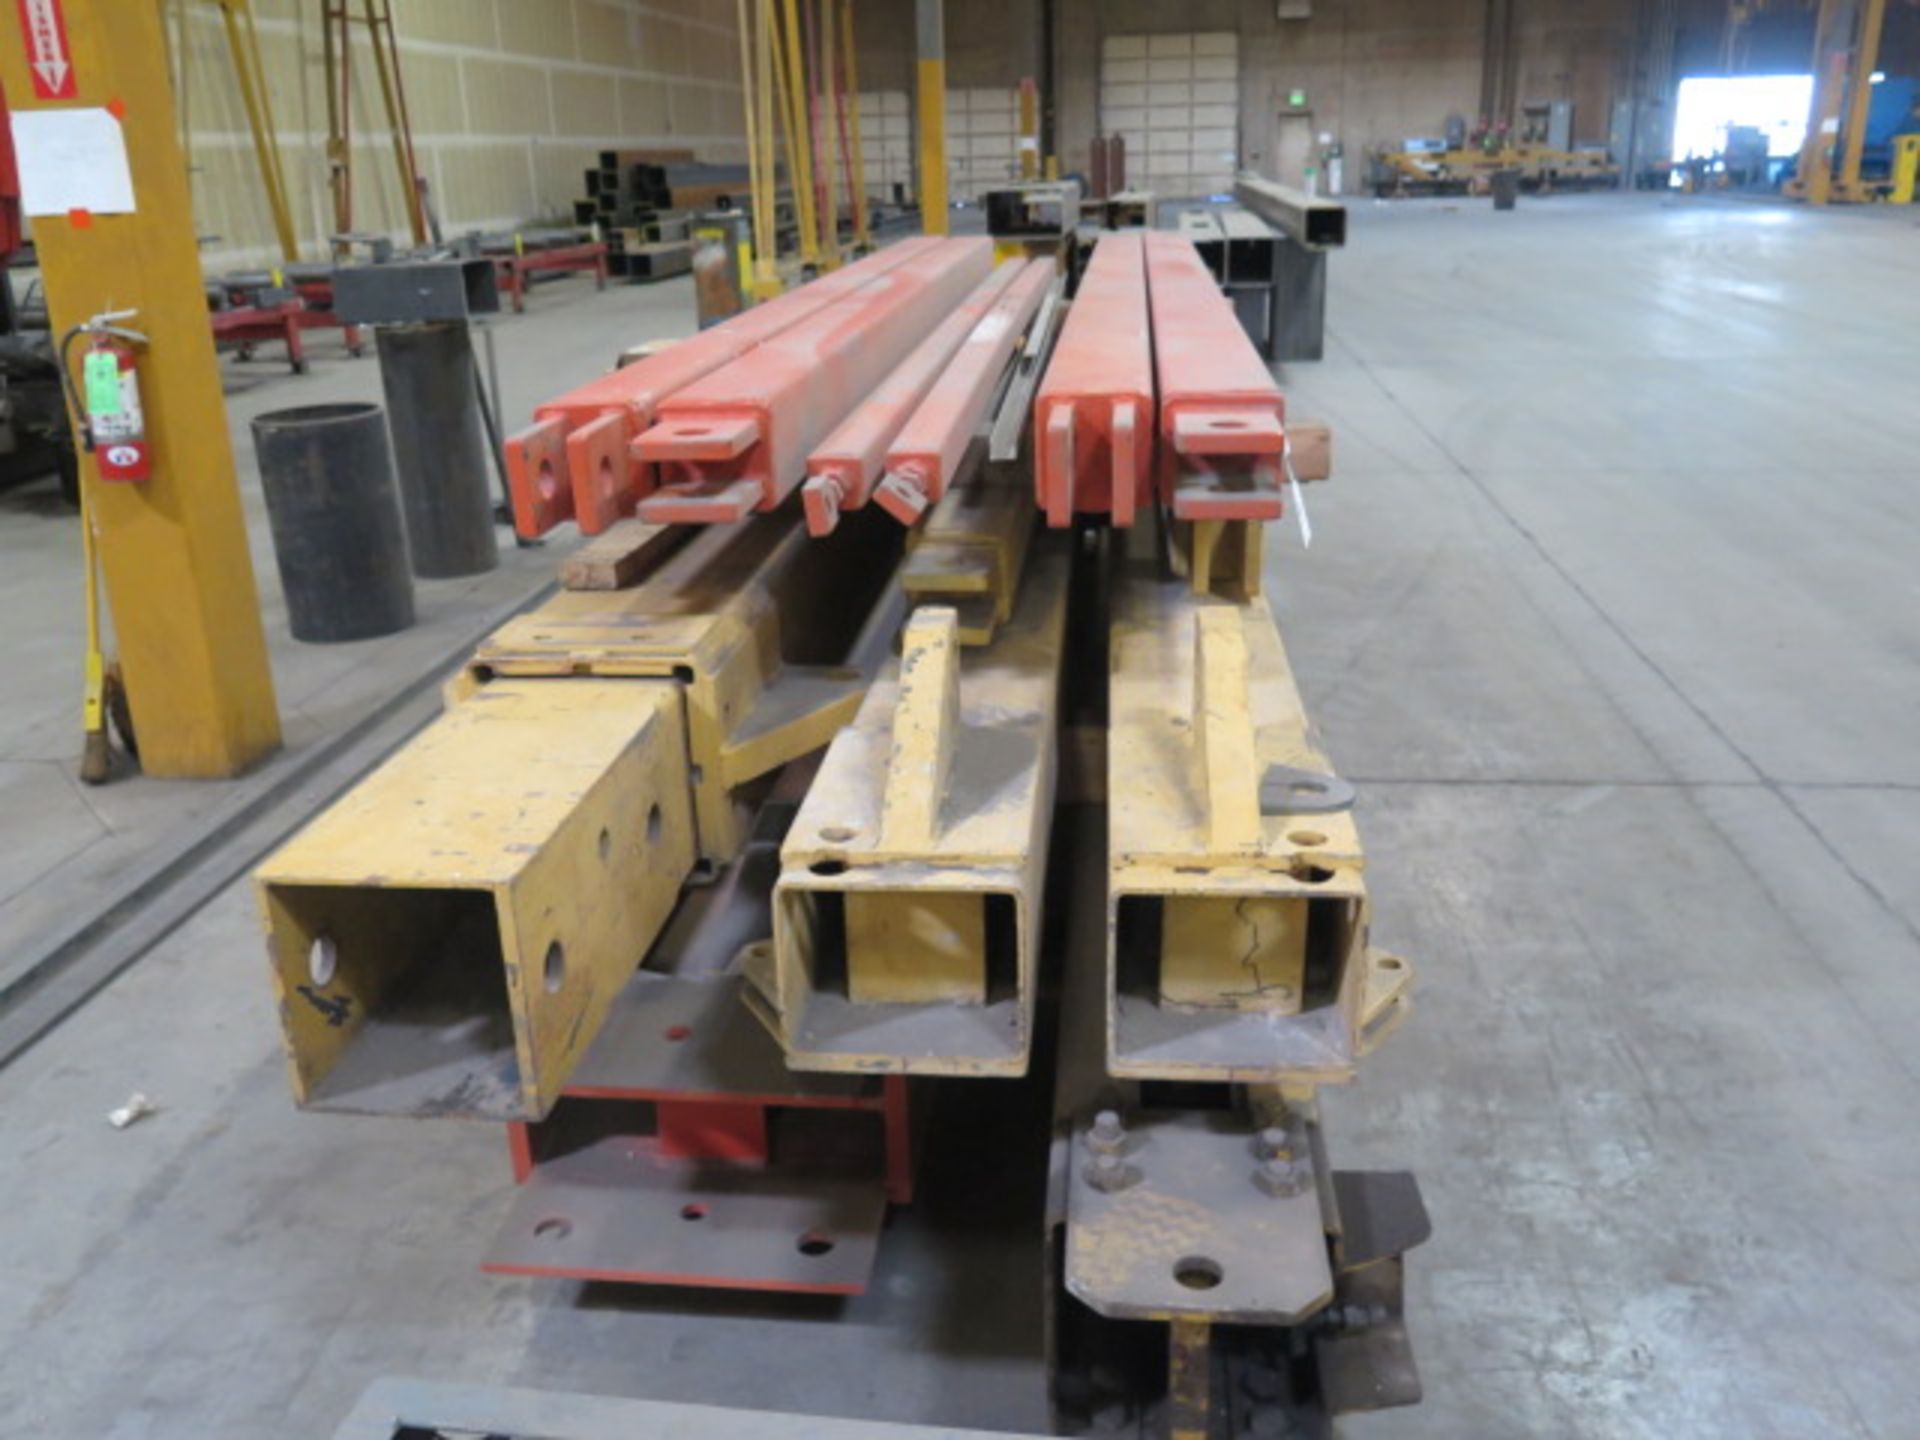 50 Ton Hydraulic Gantry Machinery Lift (SOLD AS-IS - NO WATRRANTY) - Image 4 of 20